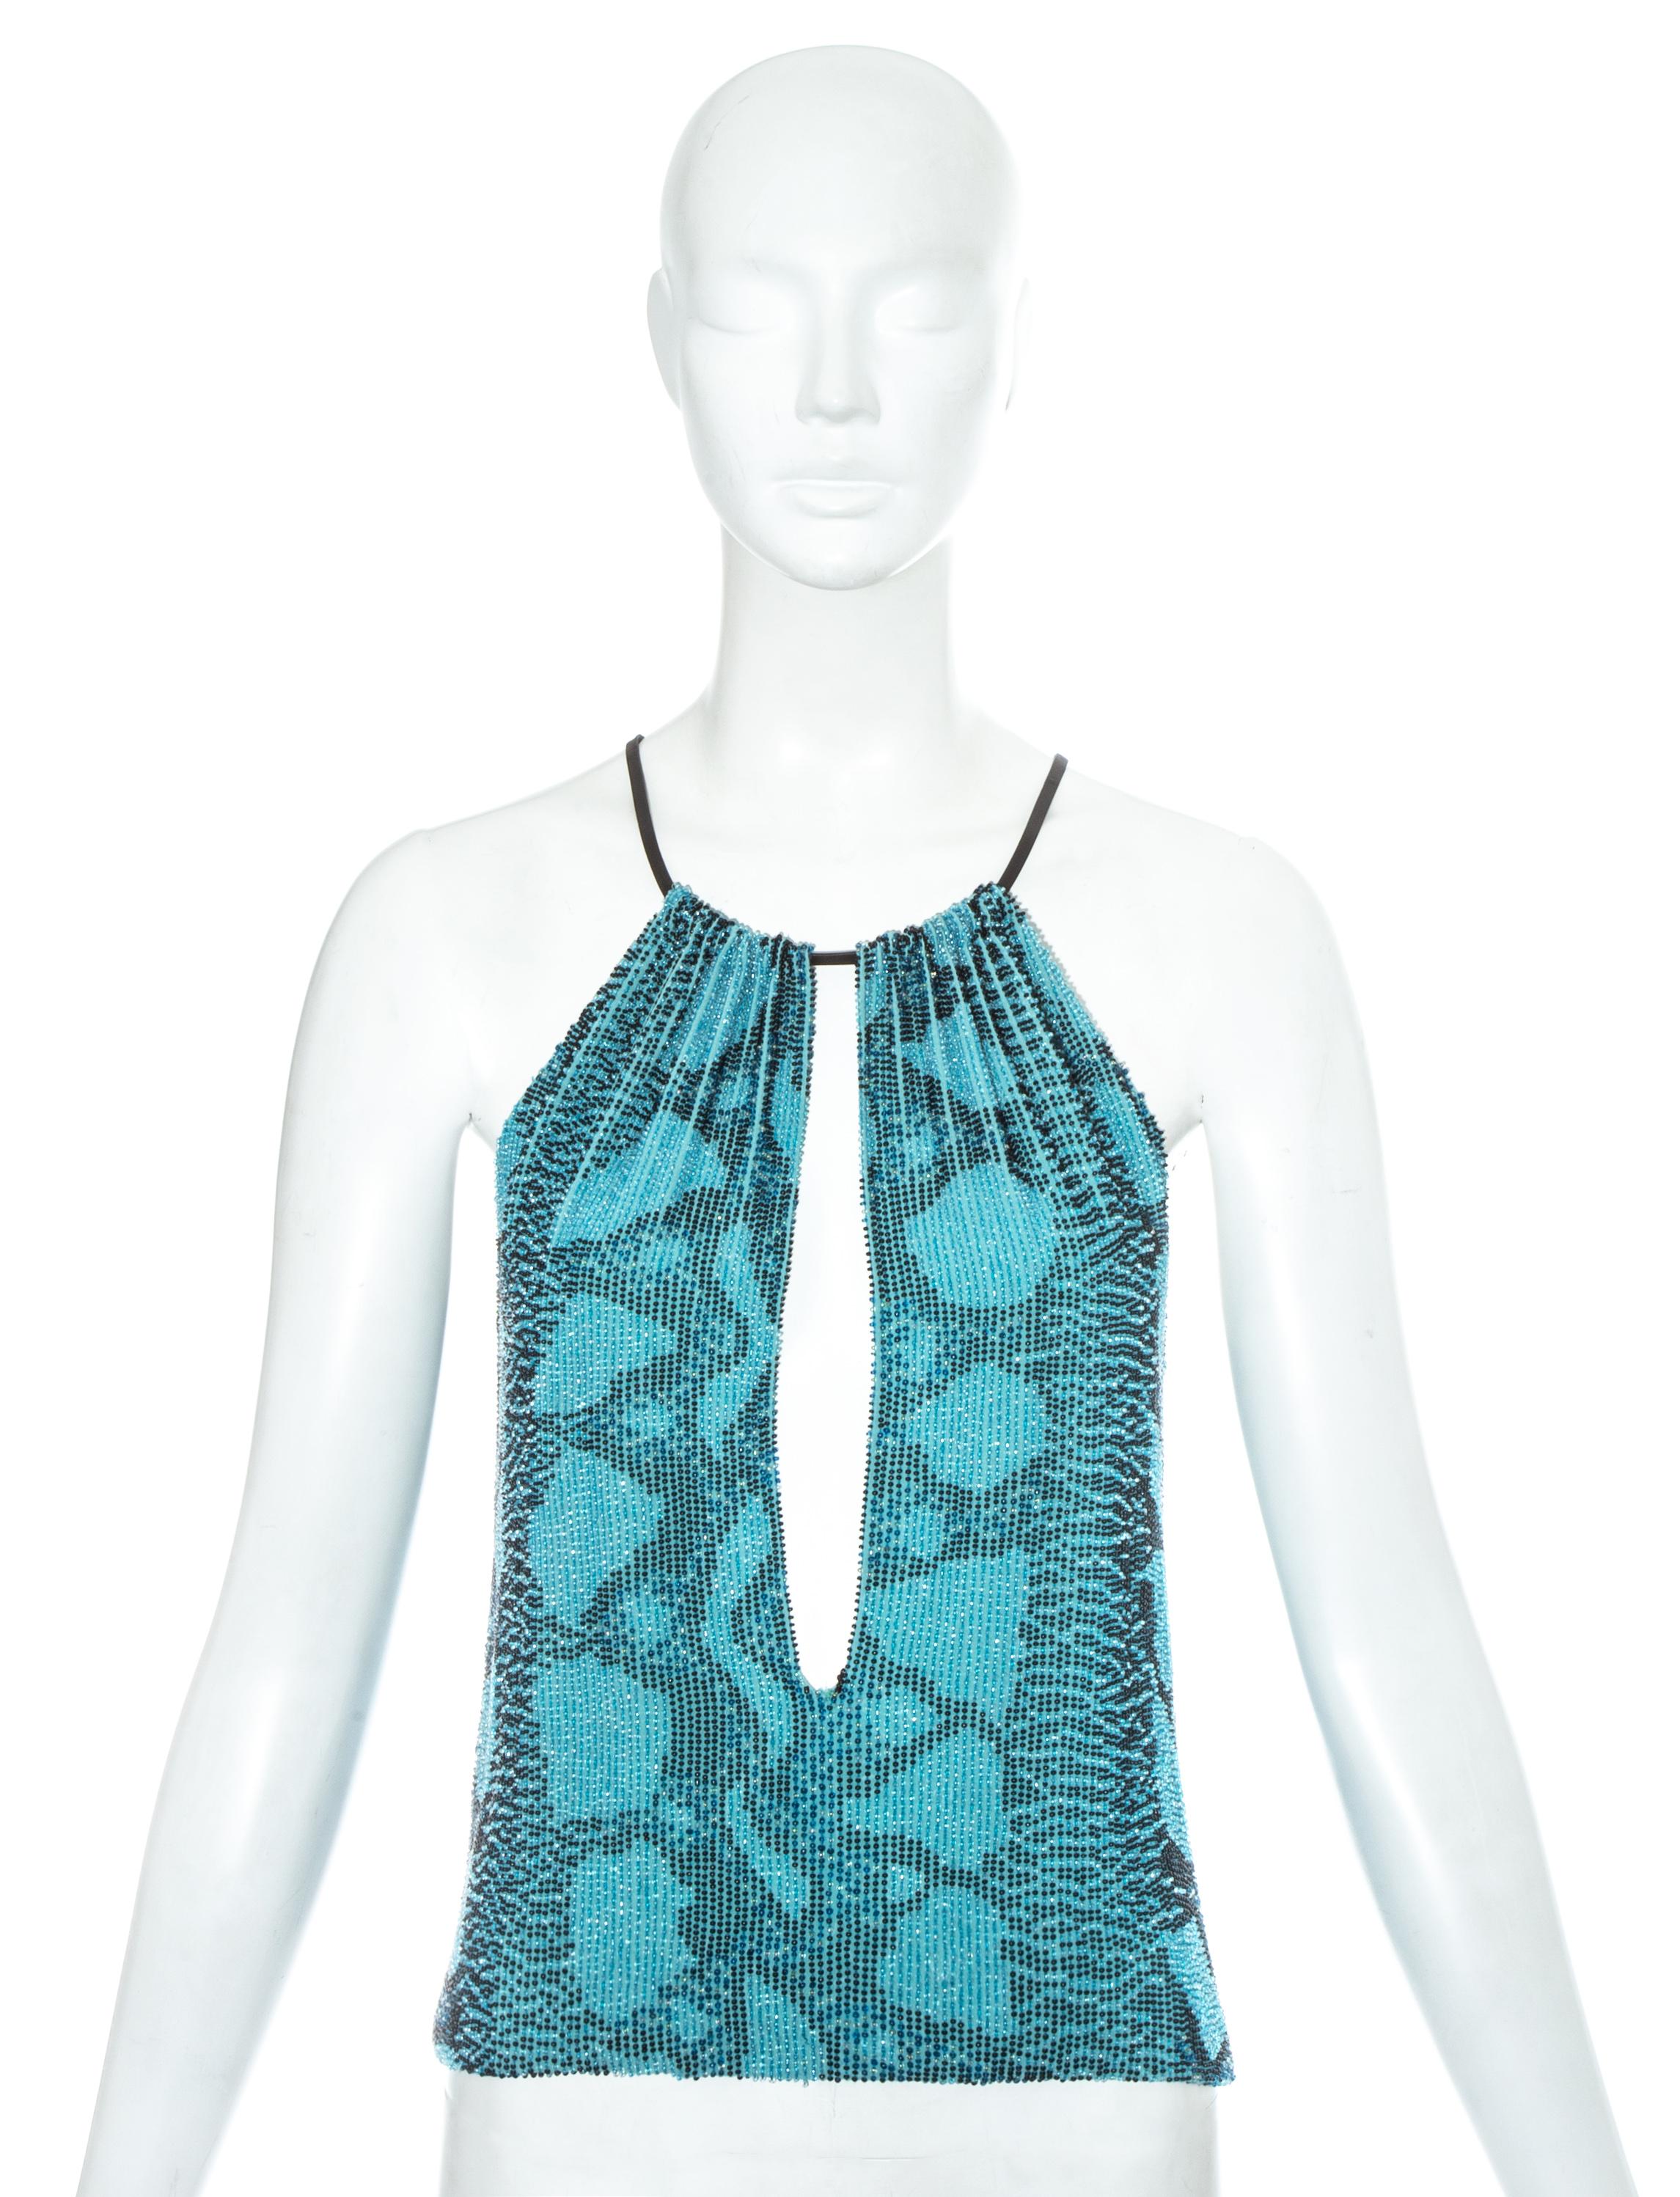 Gucci by Tom Ford, blue beaded silk evening top in a snakeskin pattern. Black leather straps with Gucci signed metal clasp. 

Spring-Summer 2000